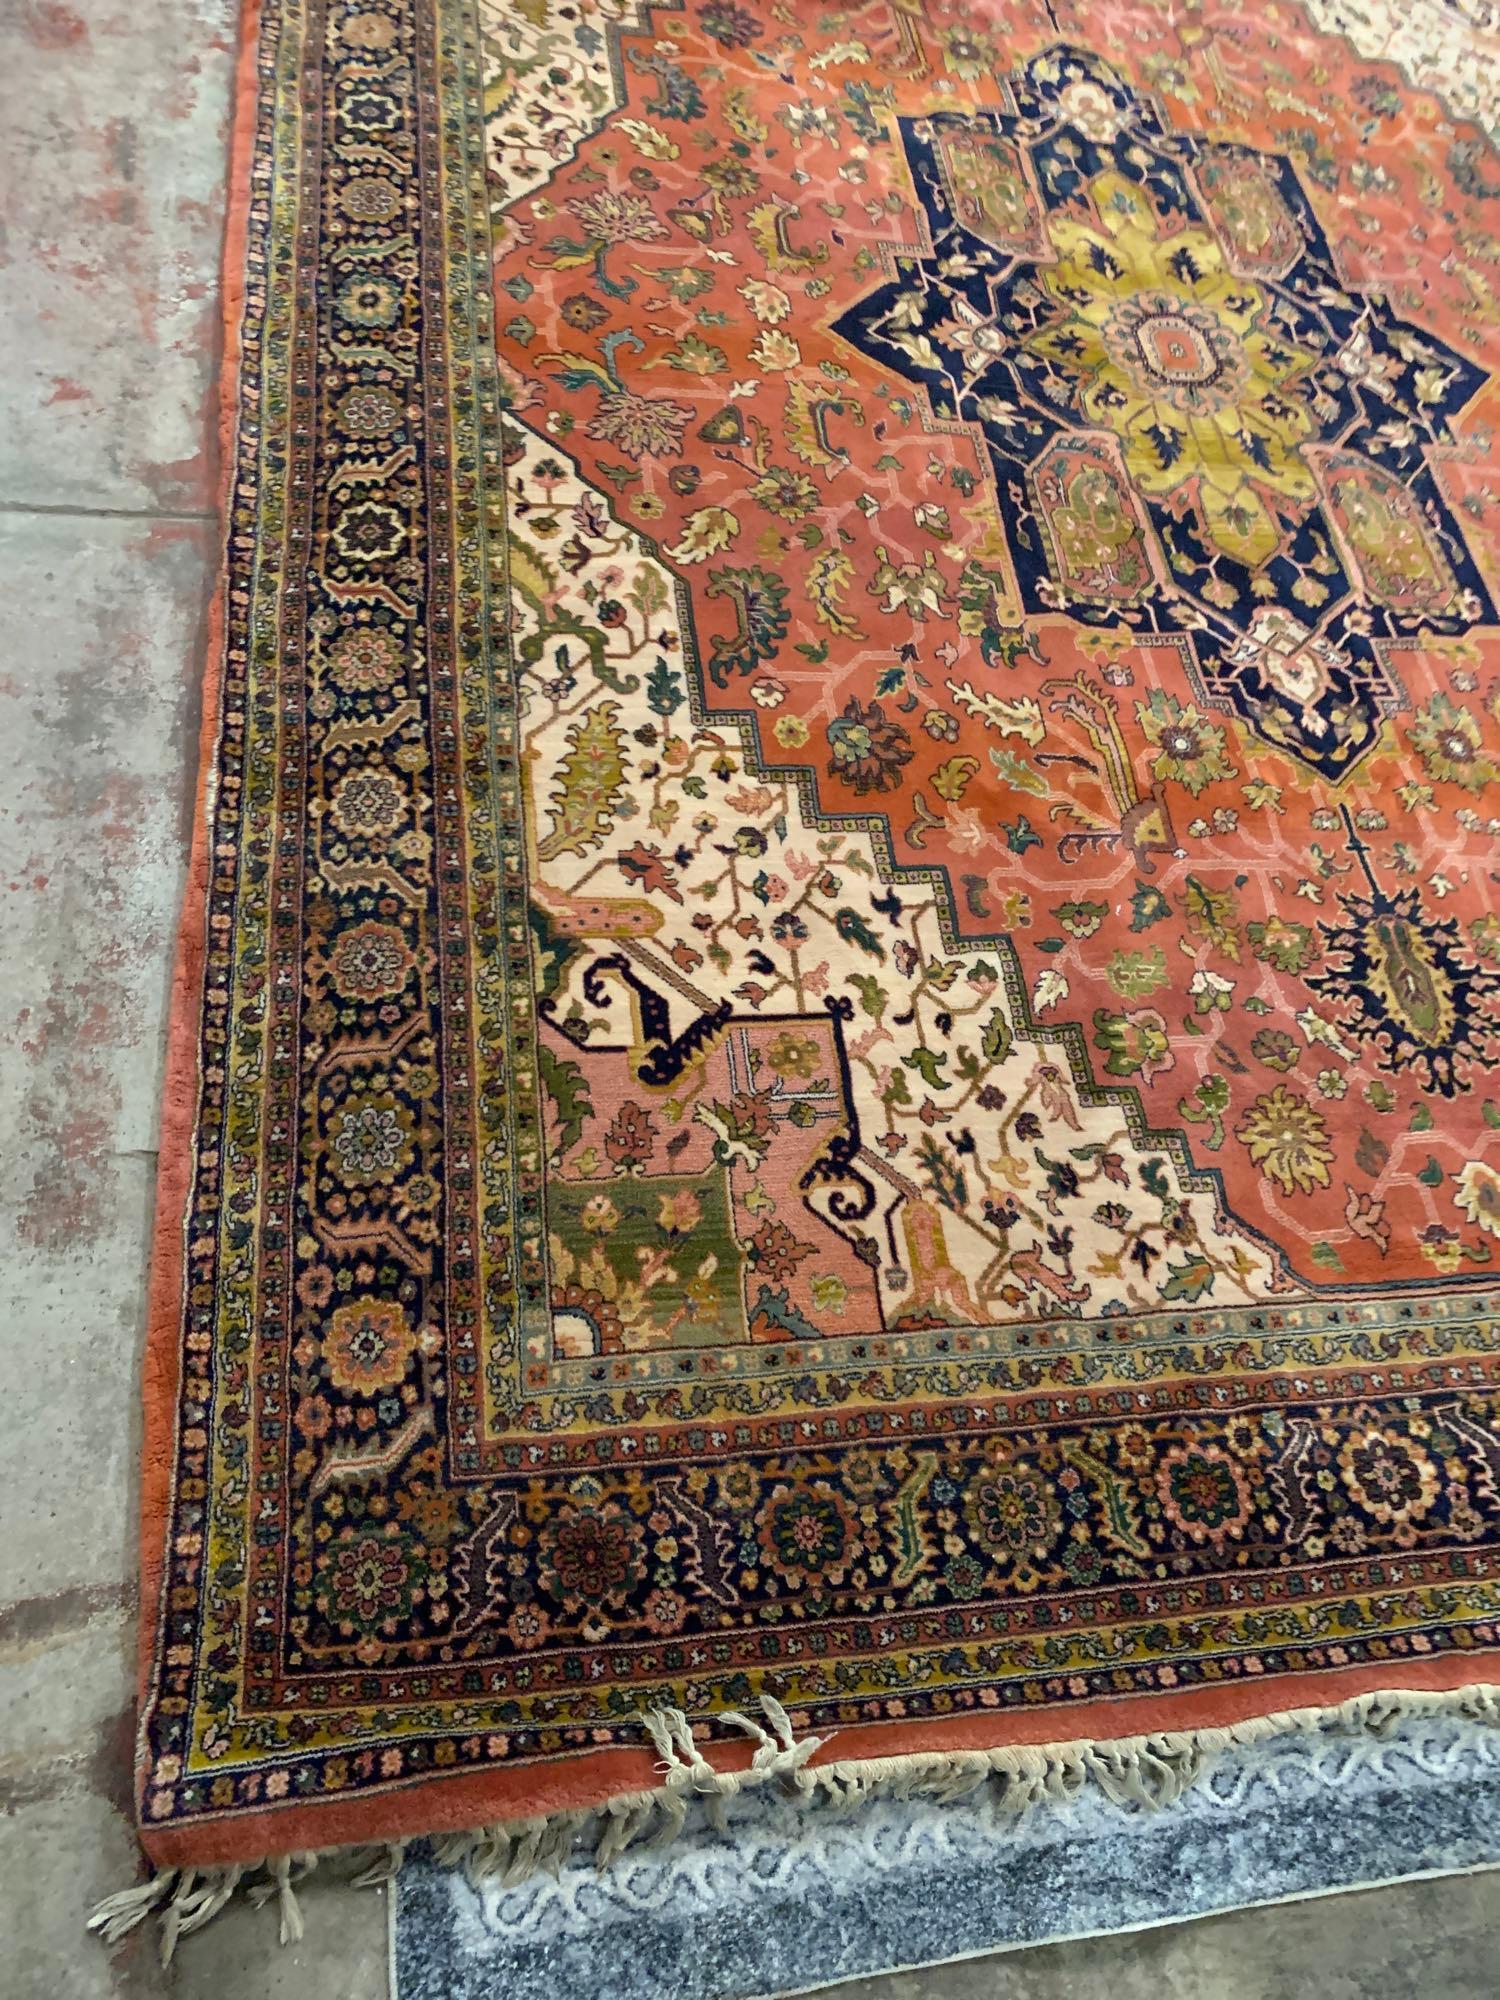 Jaipur Carpet, Rajhastan, North India, Wool On Cotton Foundation. With A Persian 'Heriz' Design, The - Image 2 of 7